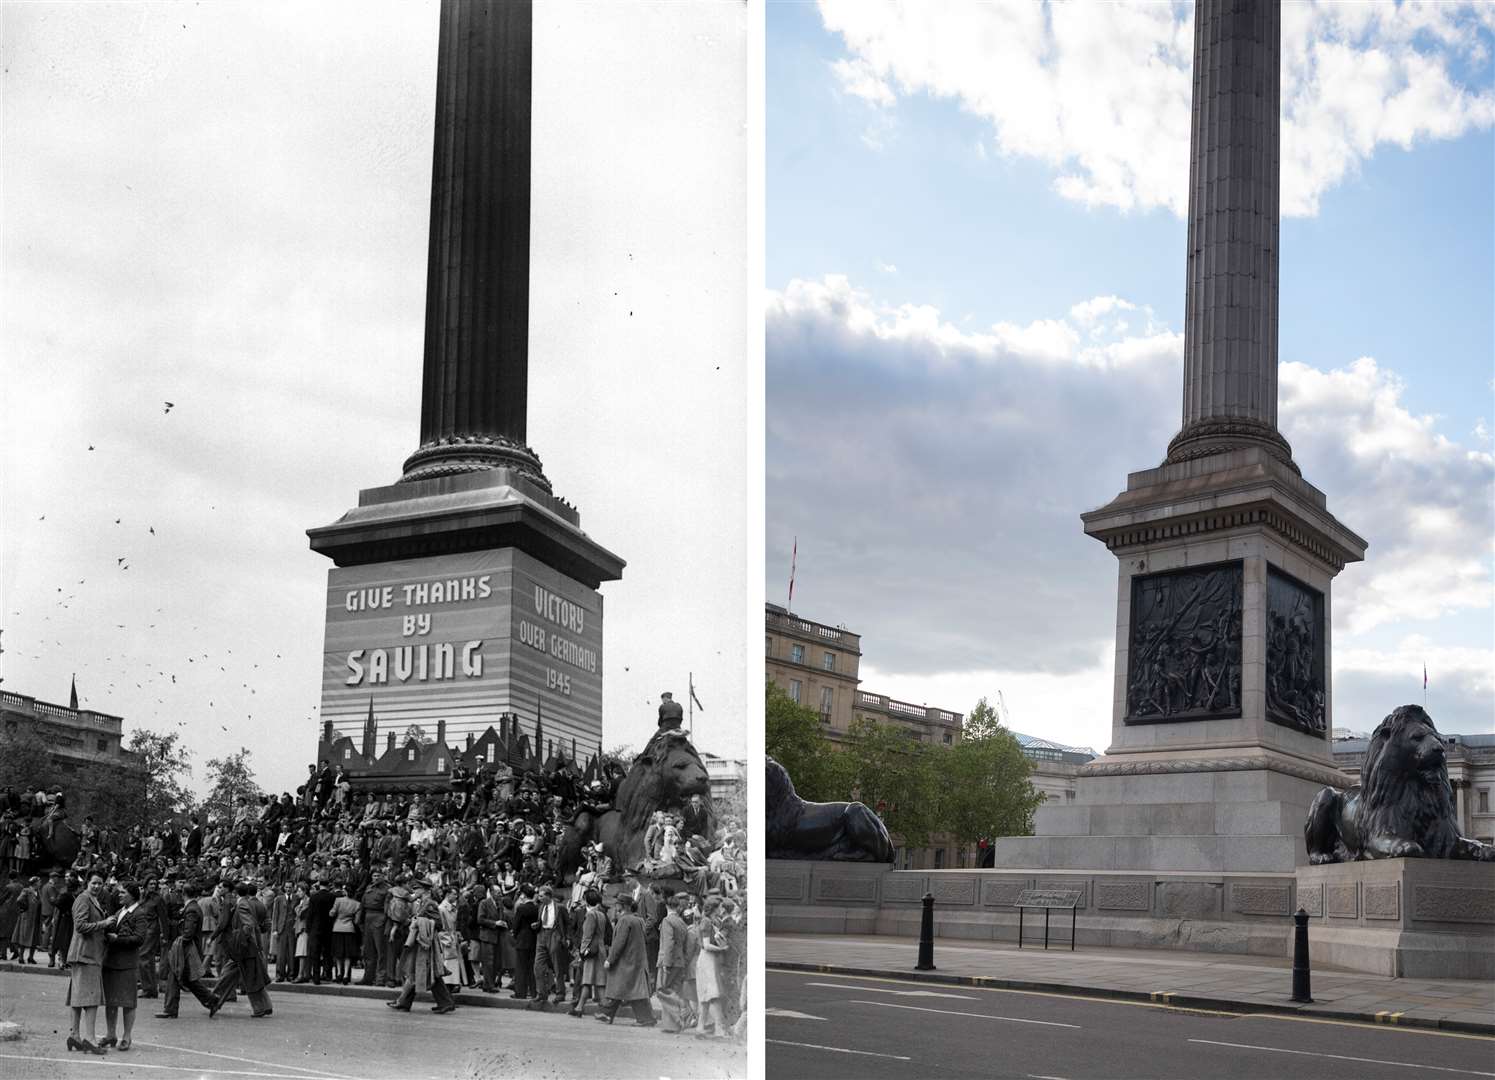 Then and now – scenes in Trafalgar Square (PA)